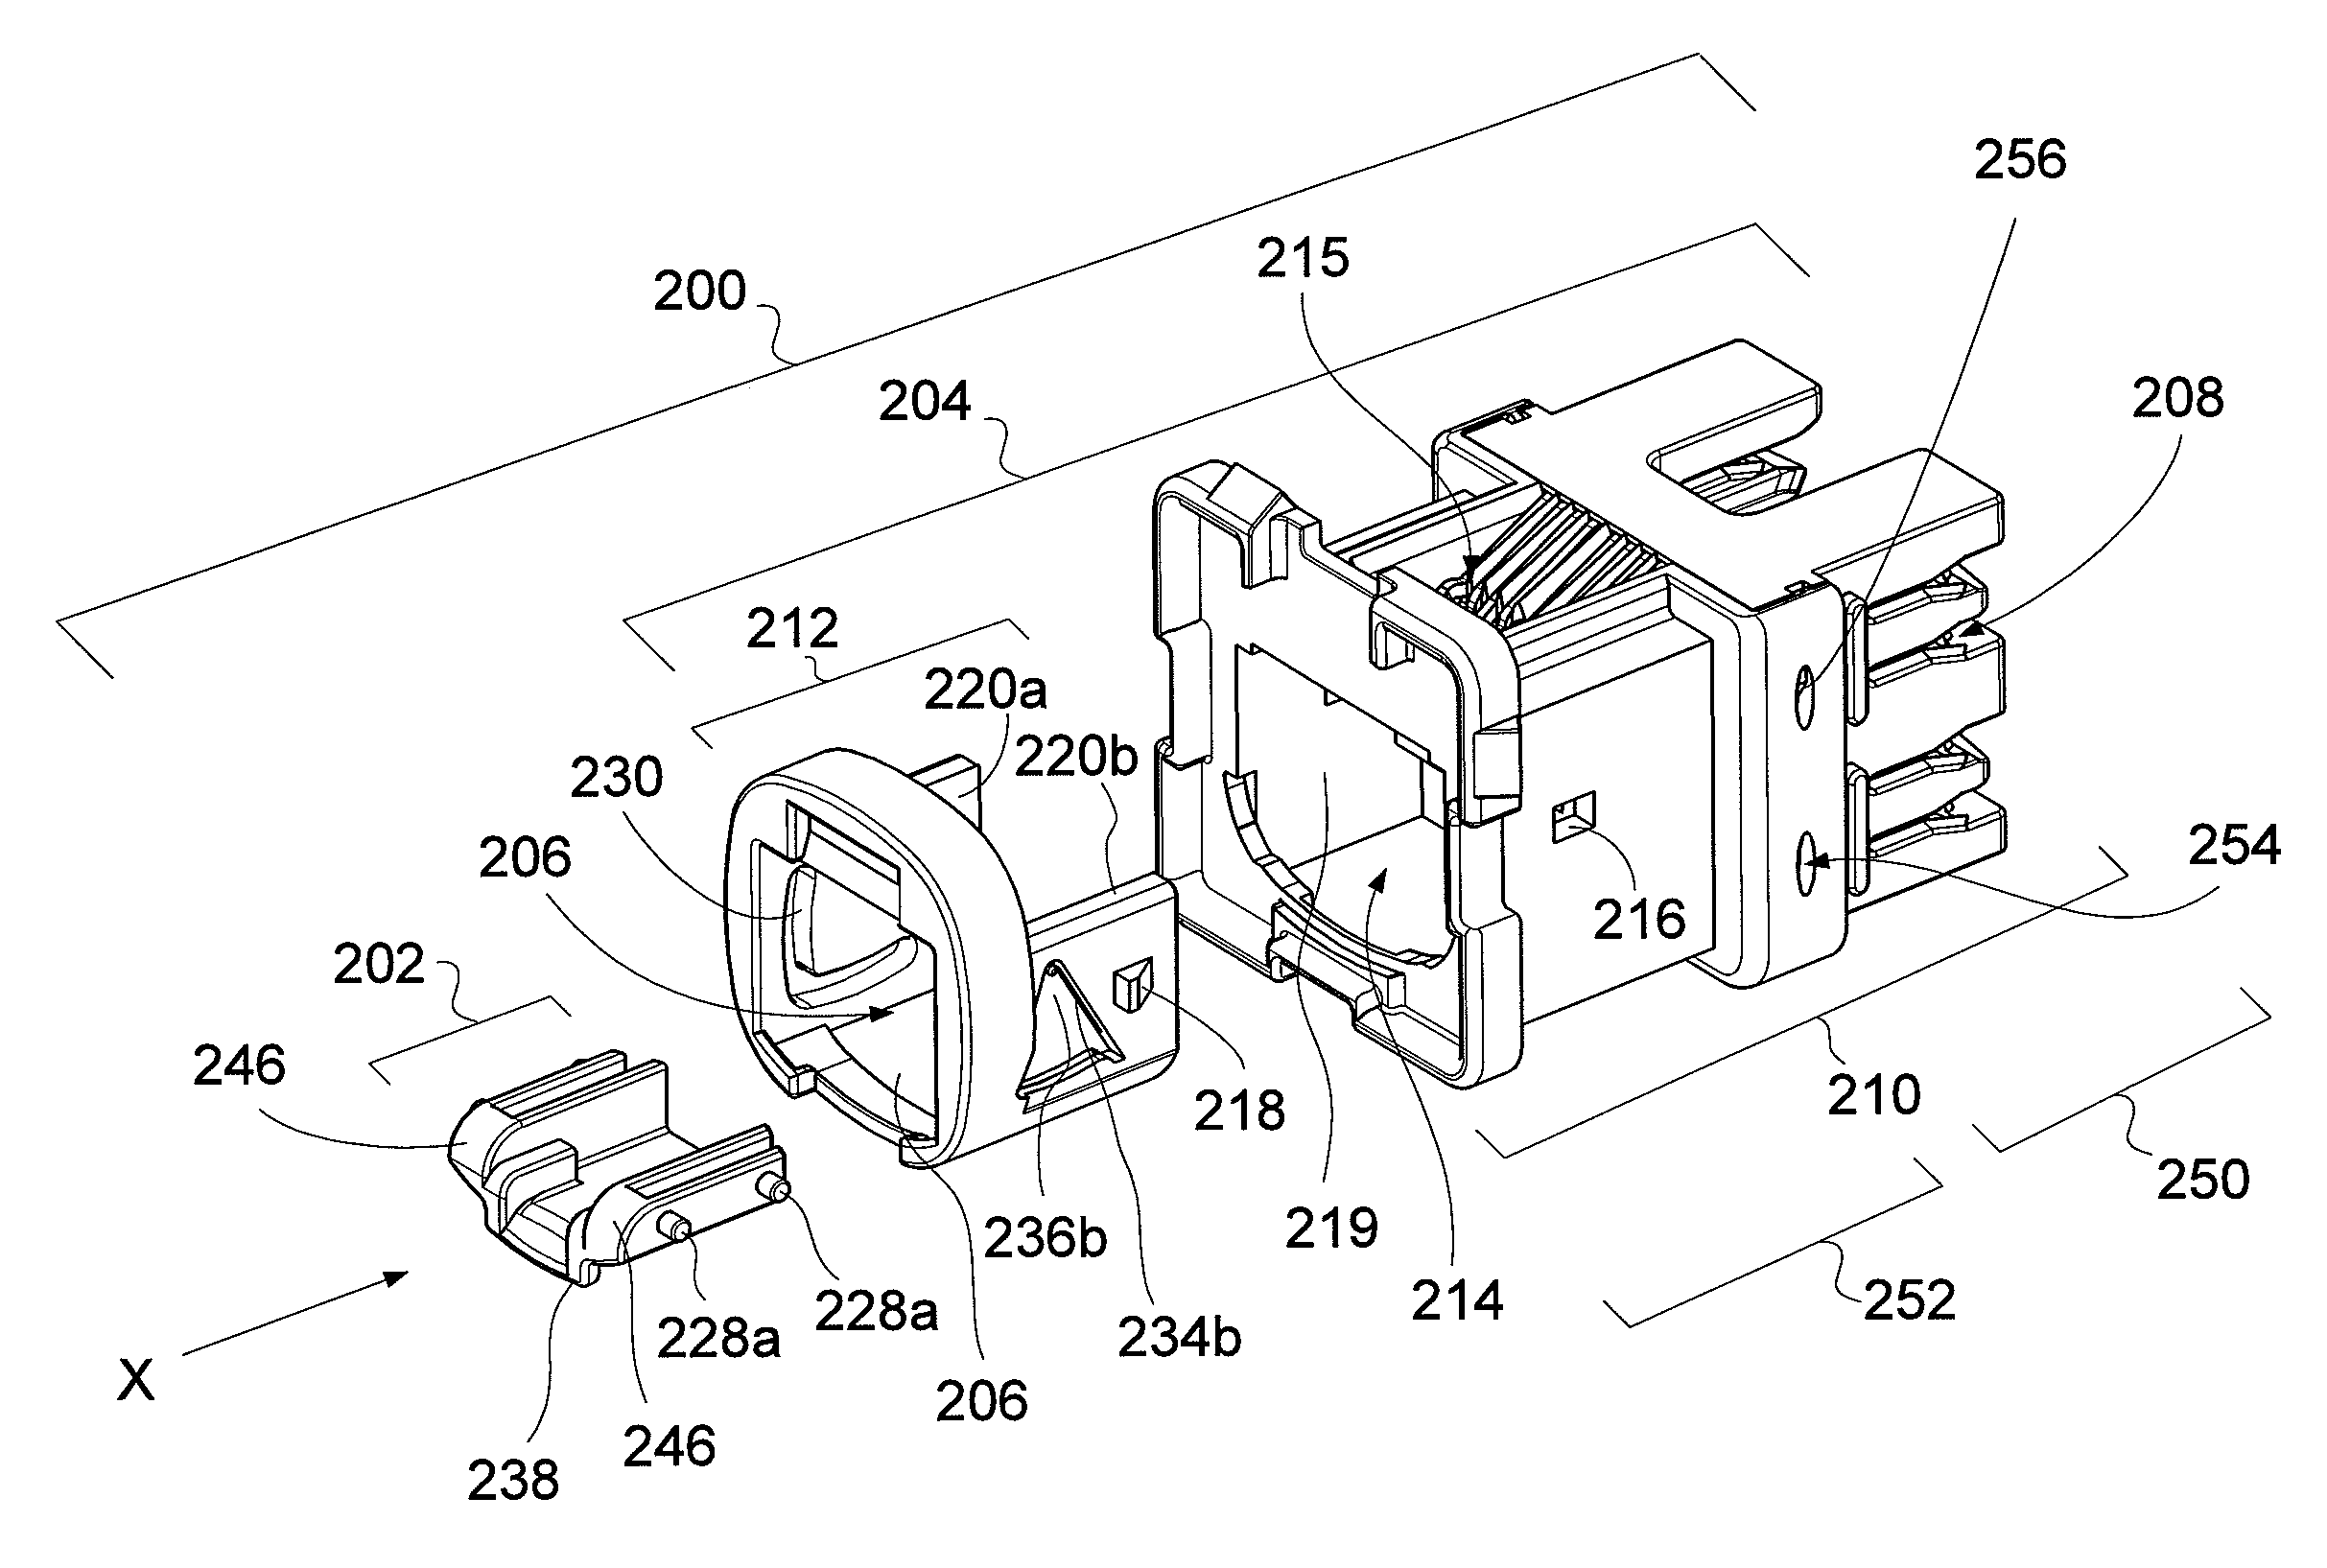 Electrical connector having a protective door element